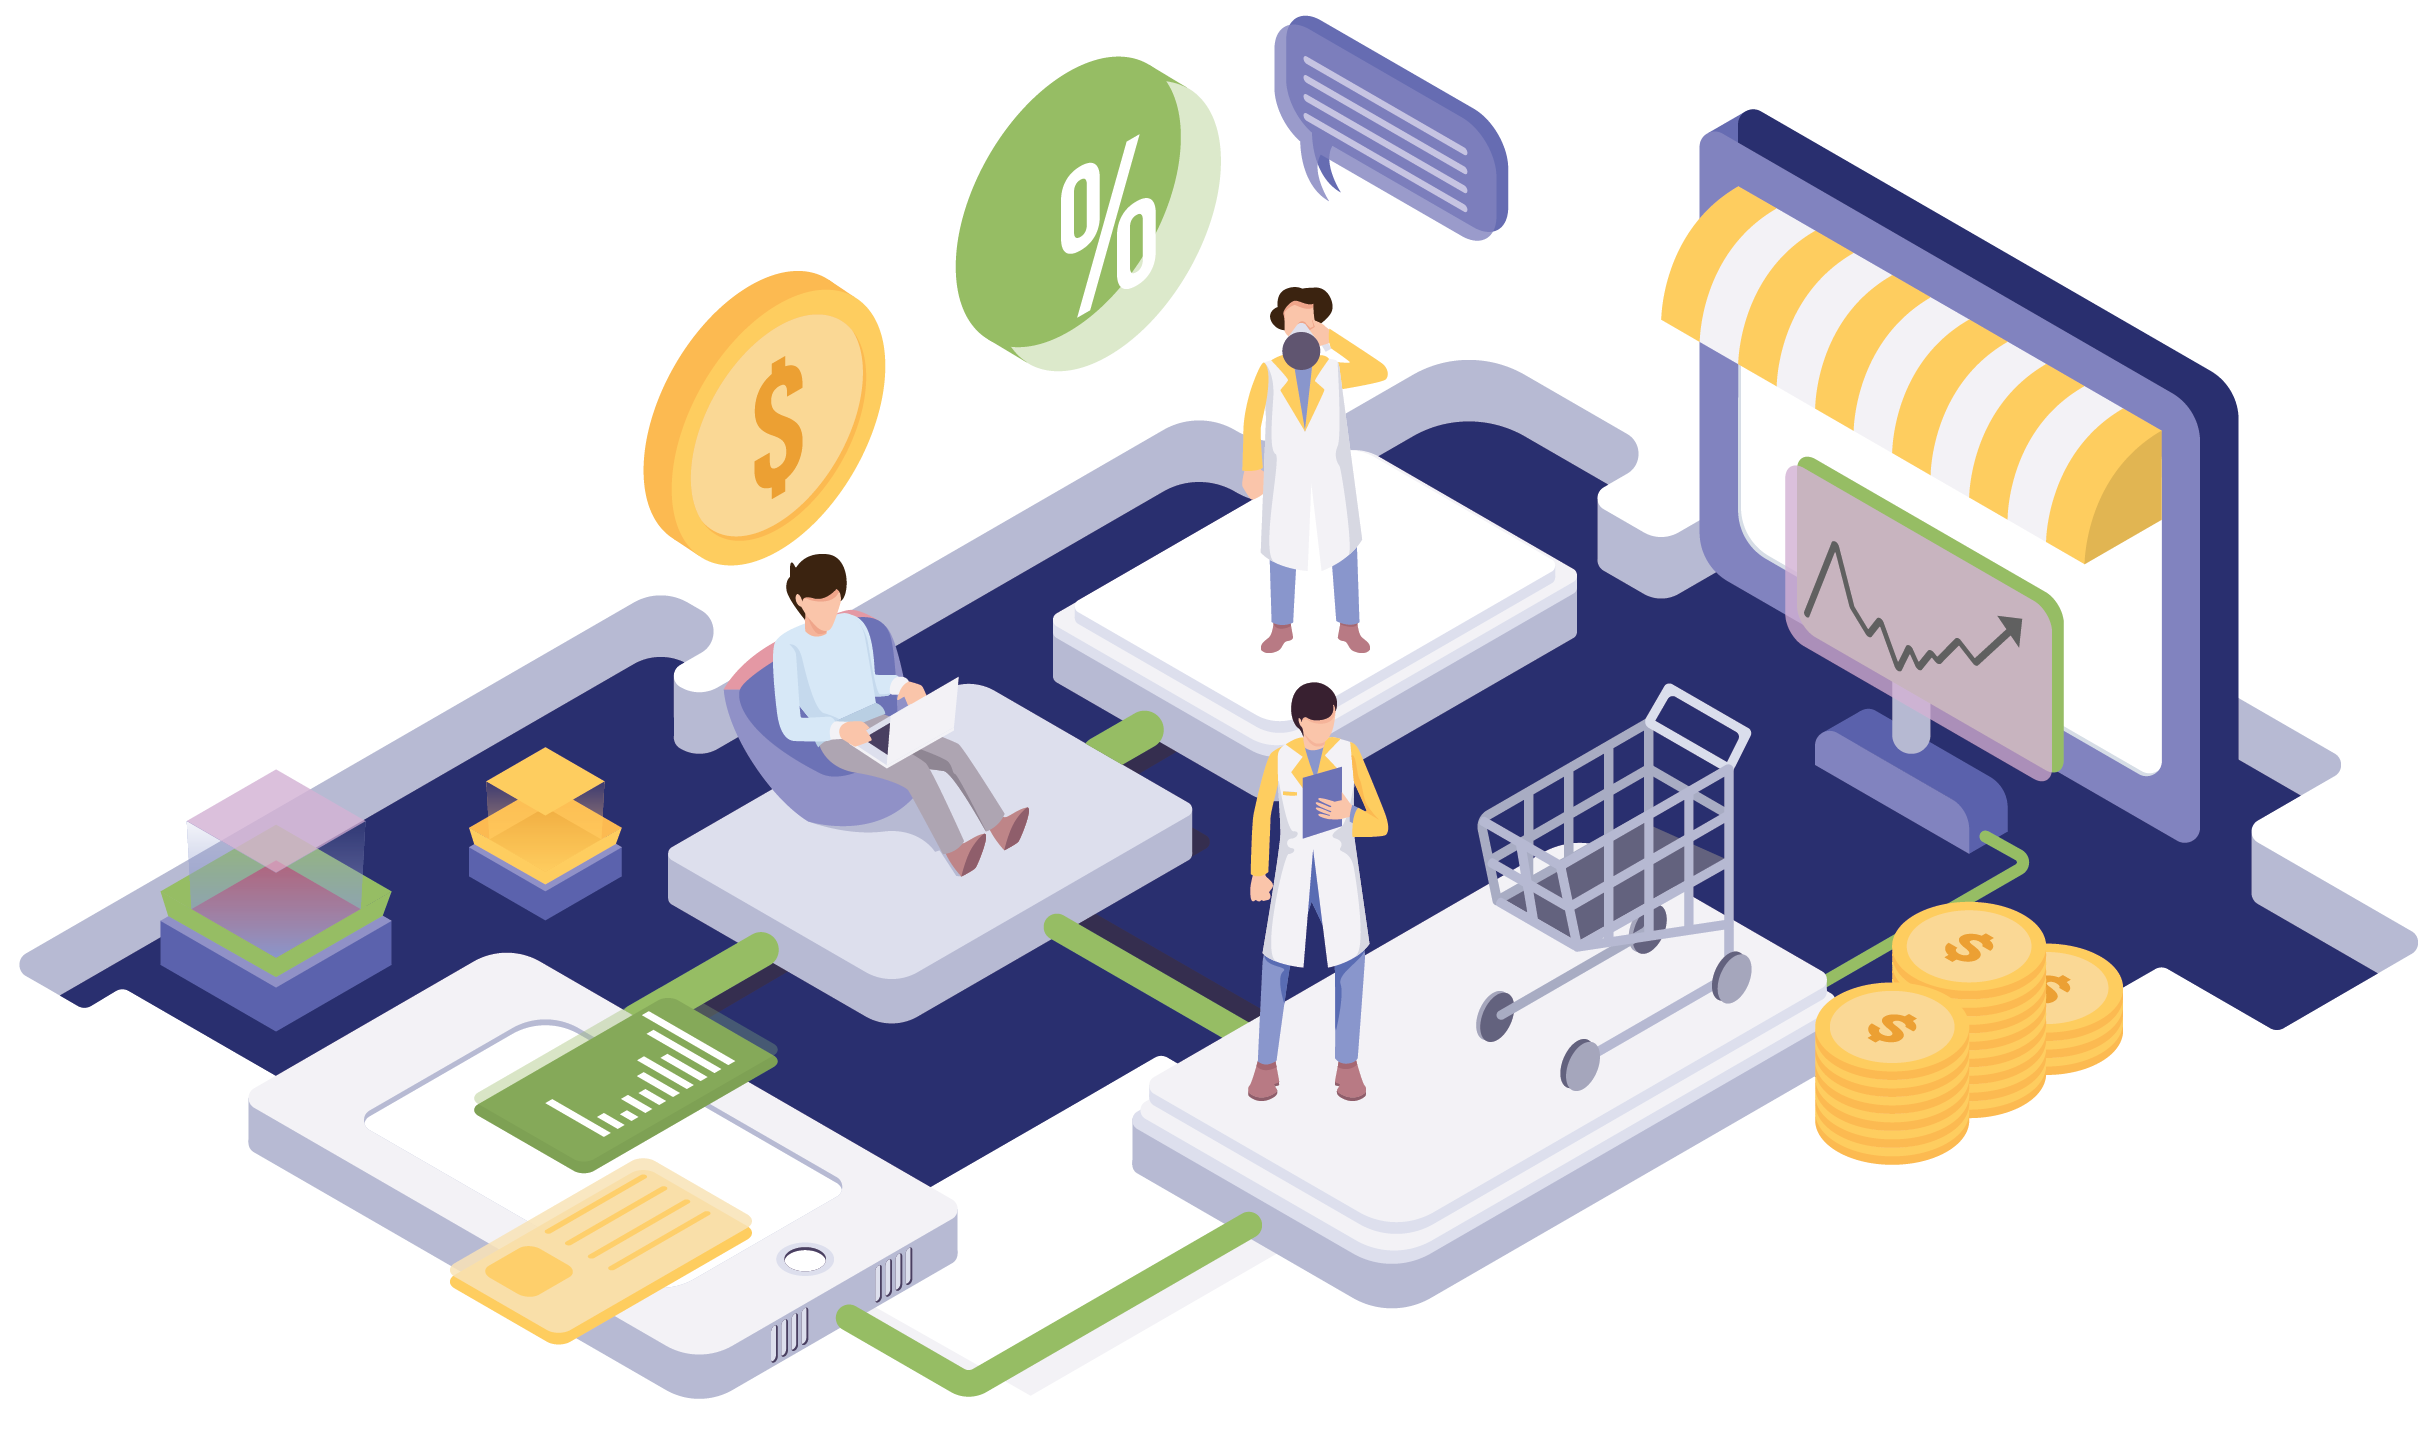 Q-Transact is an integrated white label ecommerce solution with a proprietary, automated store builder that can launch in minutes.